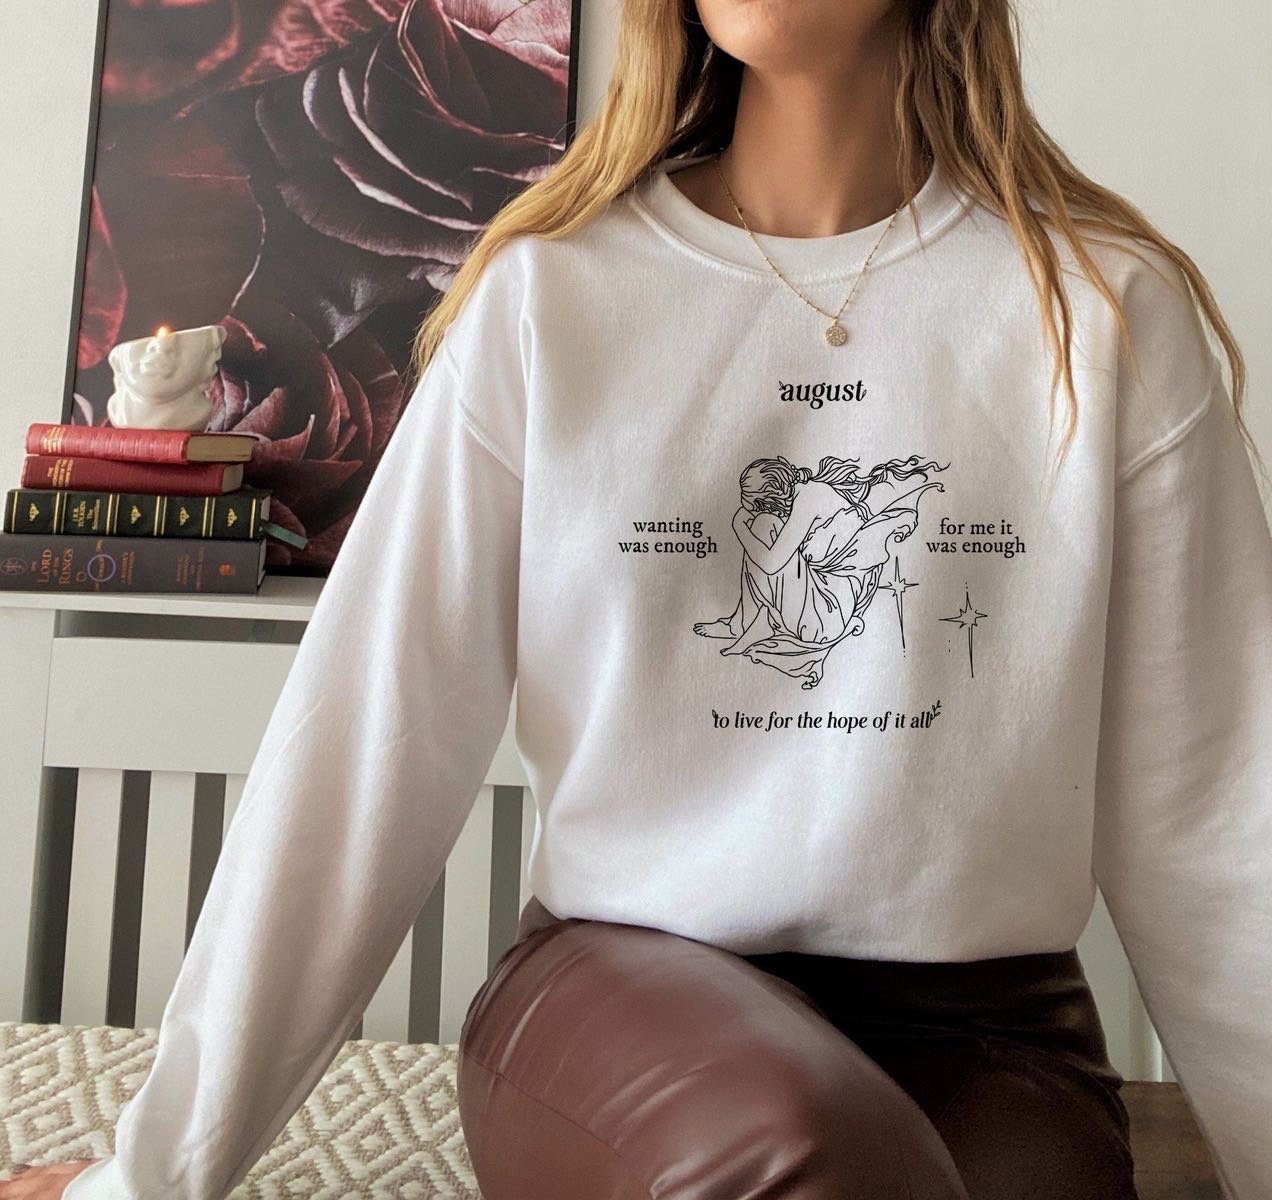 August Slipped Away Sweatshirt Clothing Womens Clothing Jumpers Pullover Jumpers August Folklore Inspired Crewneck Embroidered Sweatshirt Taylor Swift Gift 